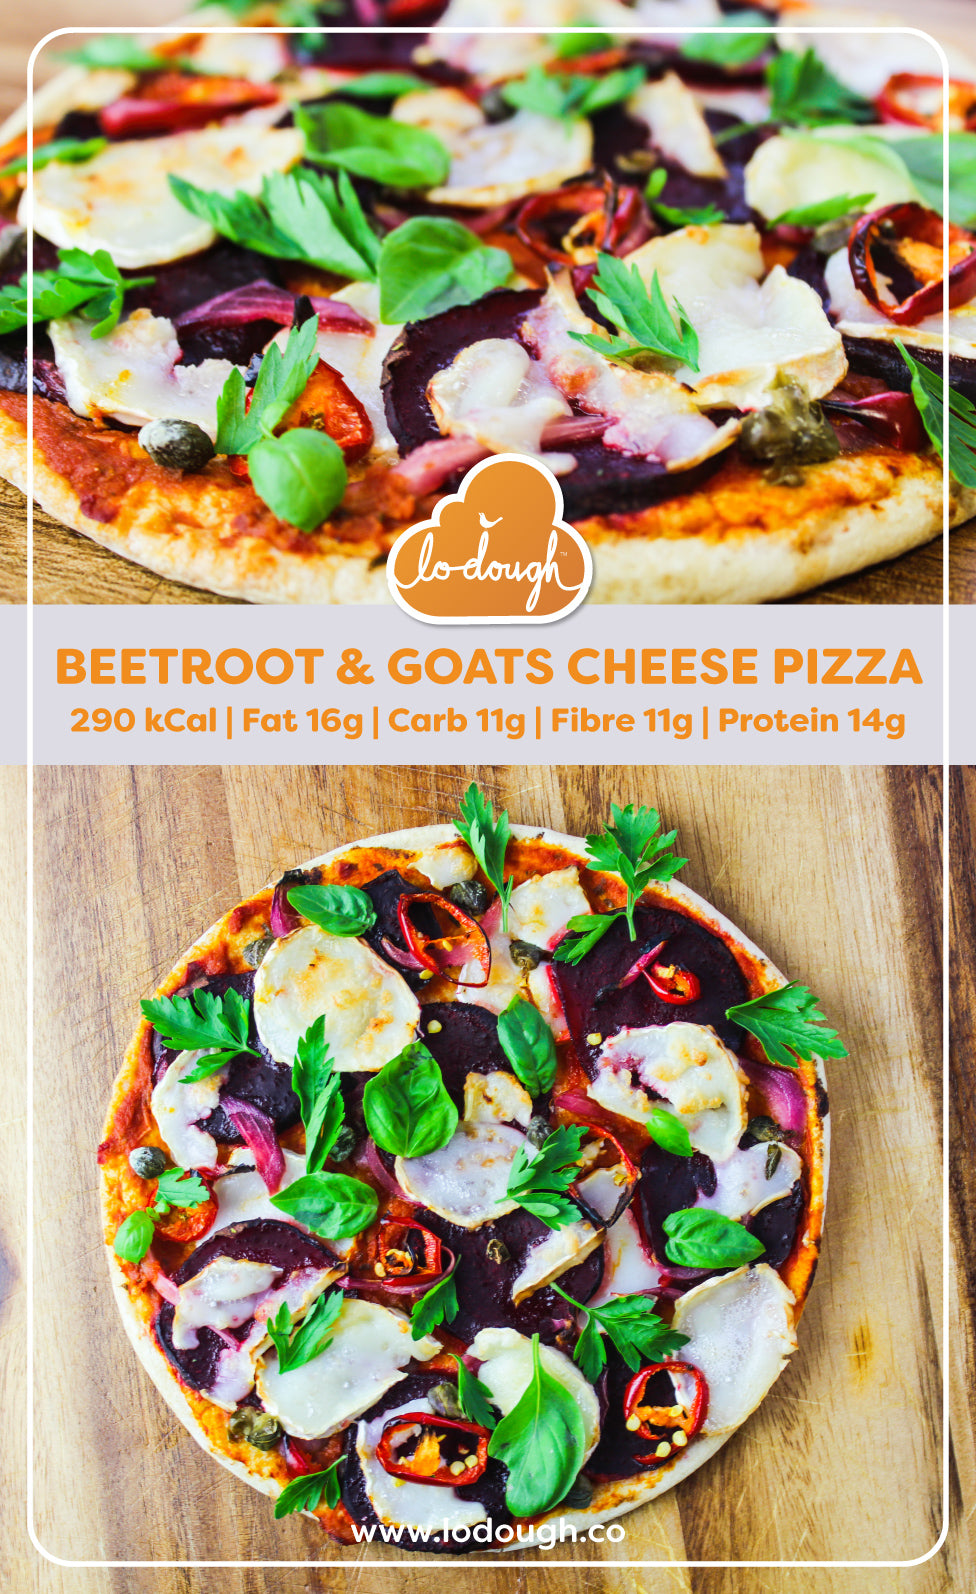 Beetroot & Goats Cheese Pizza